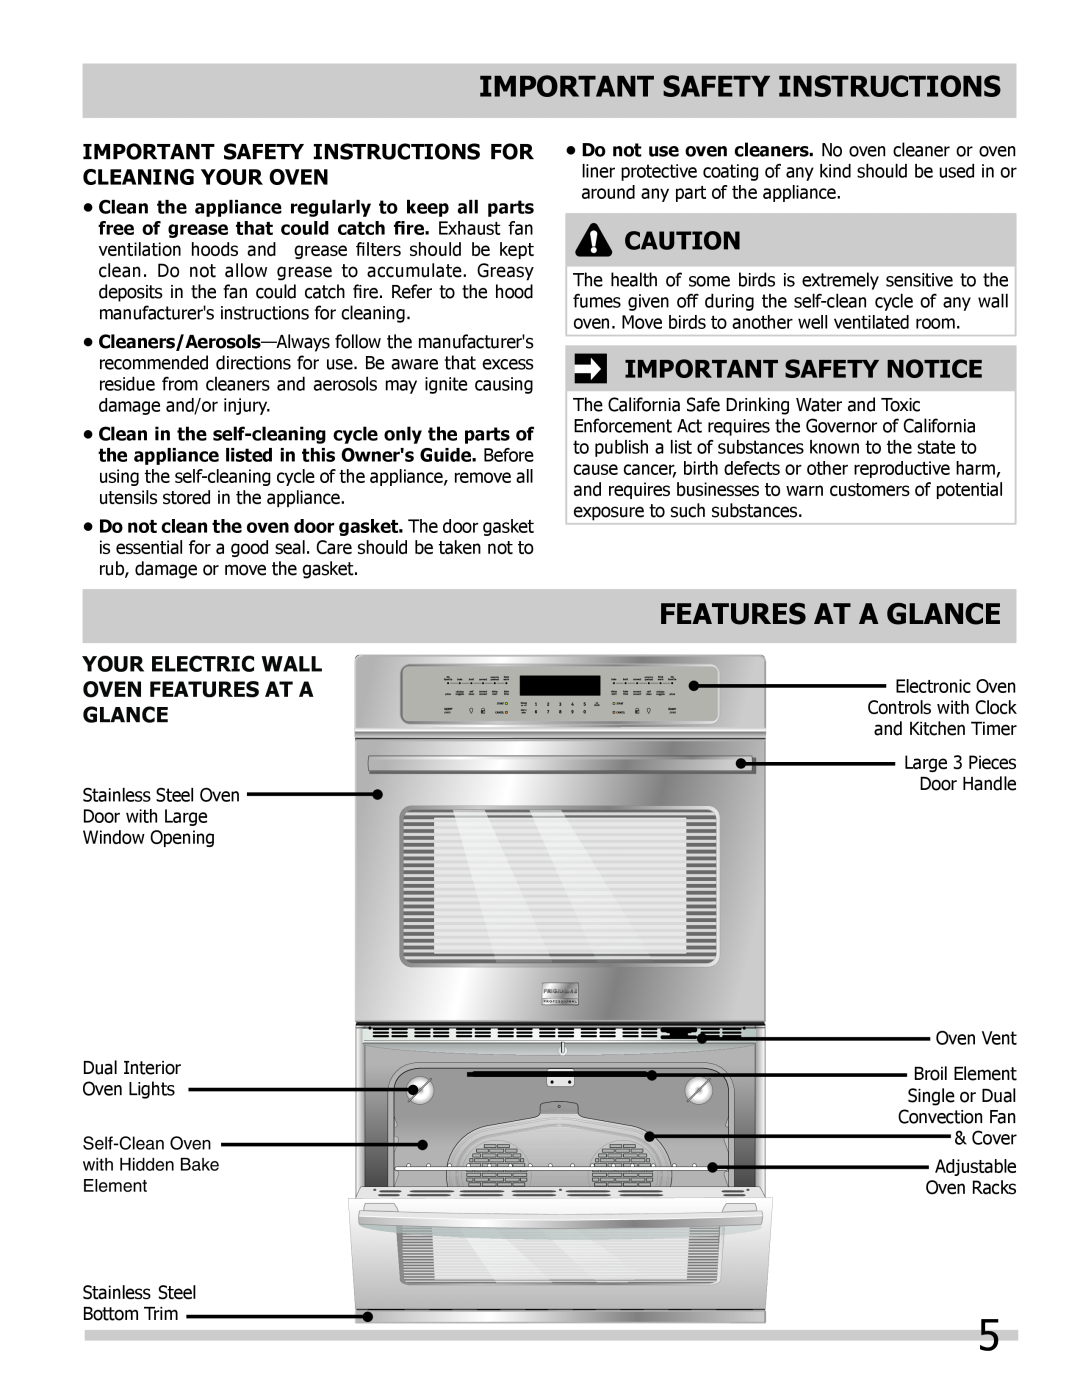 Frigidaire 318205307 Features At A Glance, Important Safety Notice, Important Safety Instructions For Cleaning Your Oven 